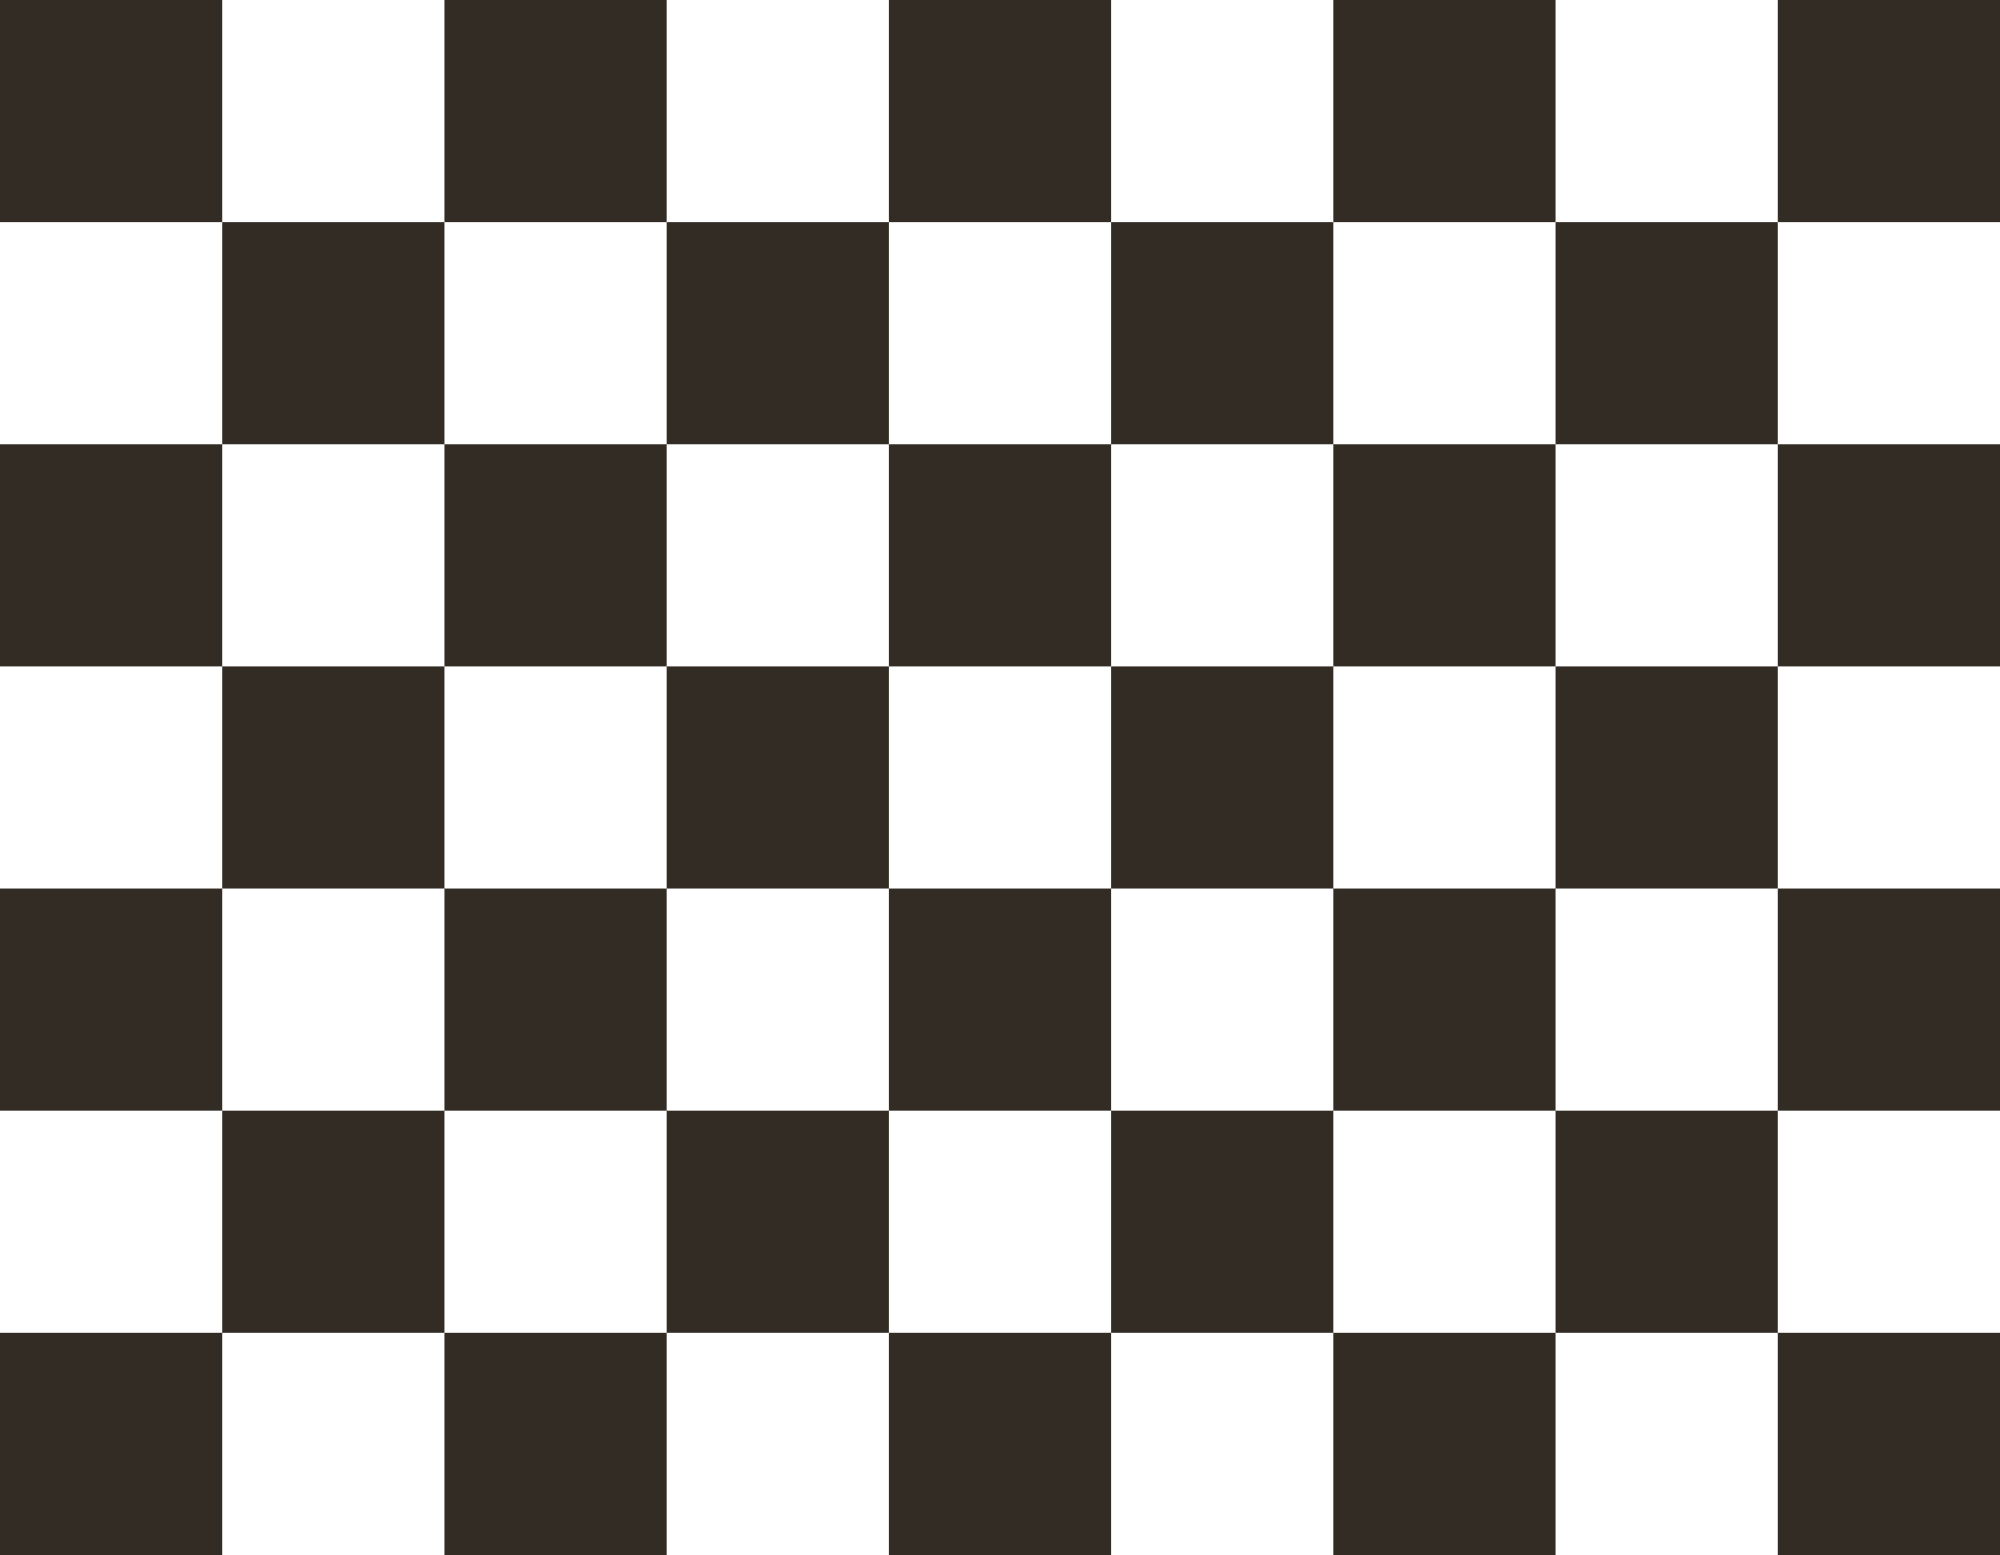 File:F1 chequered flag.svg - Wikimedia Commons